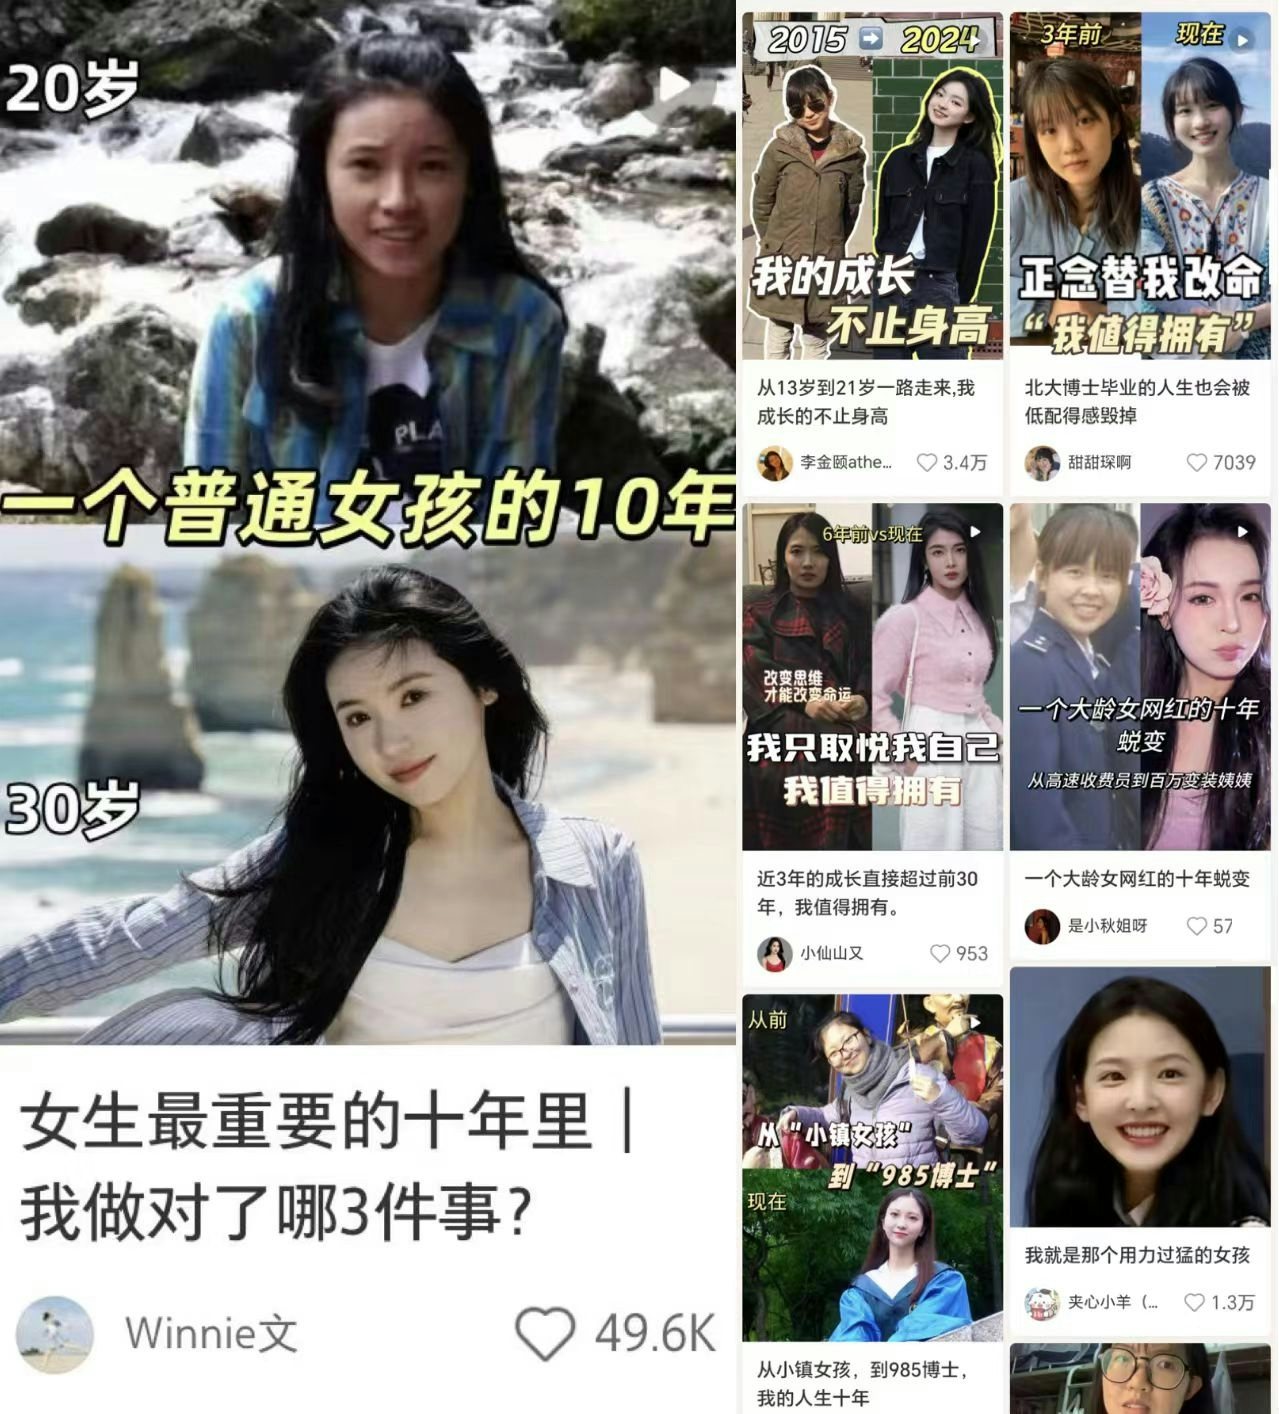 Videos and messages from users flooded Xiaohongshu with inspiring stories of female empowerment. Photo: L’Oréal Paris  